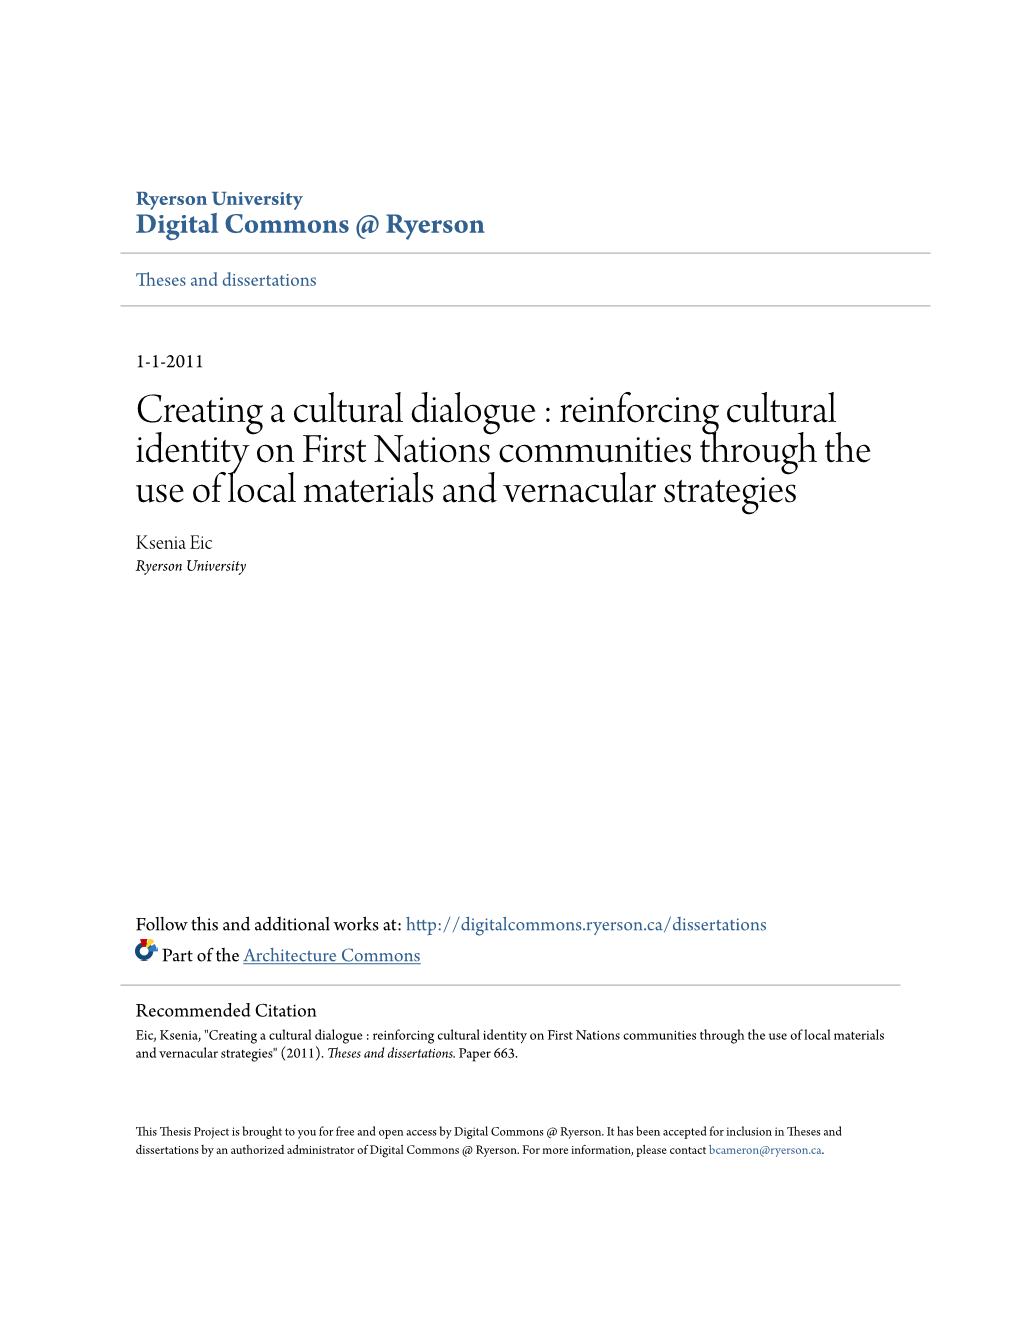 Reinforcing Cultural Identity on First Nations Communities Through the Use of Local Materials and Vernacular Strategies Ksenia Eic Ryerson University